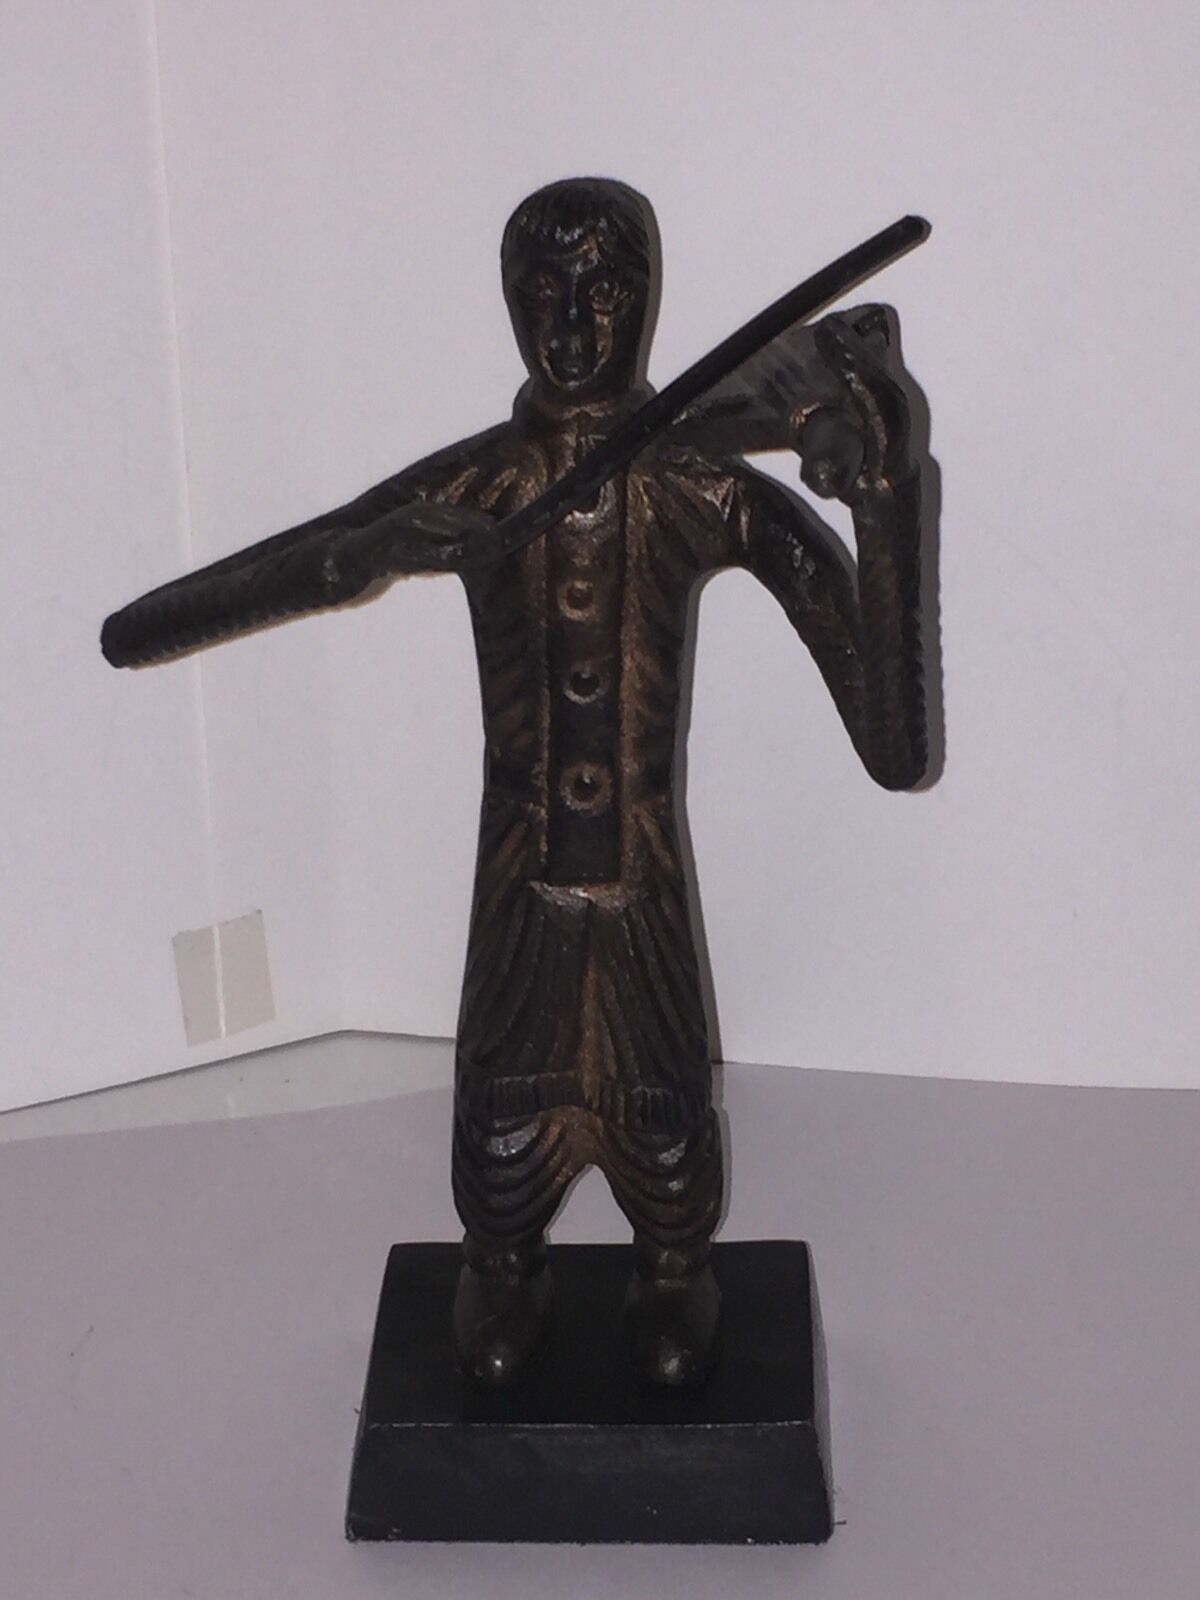 Cast Iron Figure of a Man in East Indian Clothing Playing the Violin